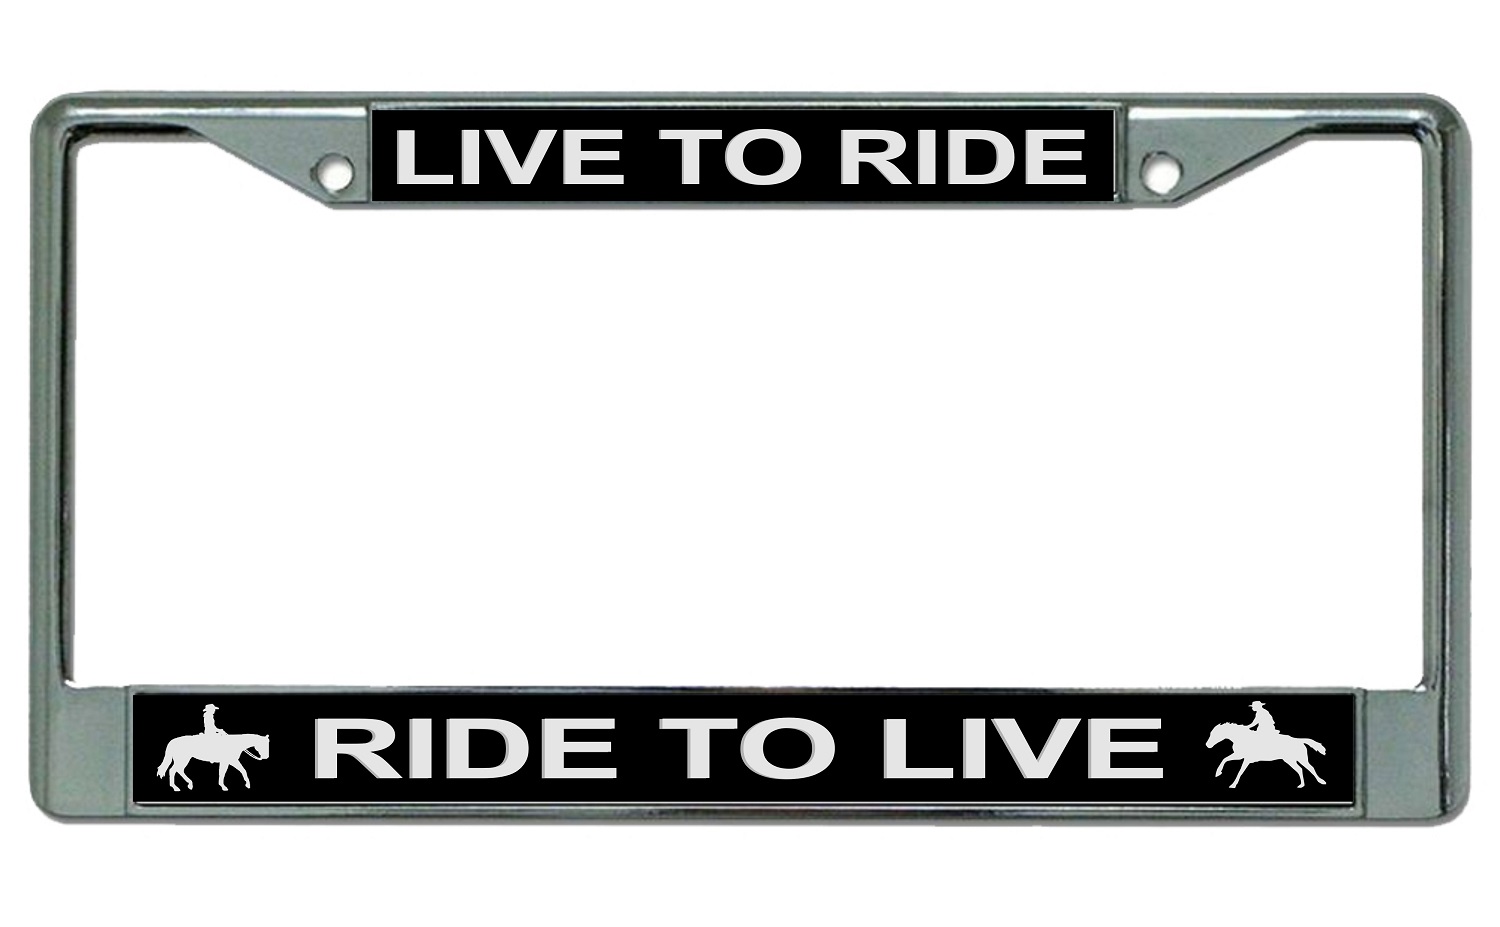 Live To Ride Ride To Live Horse On Black Chrome License Plate FRAME